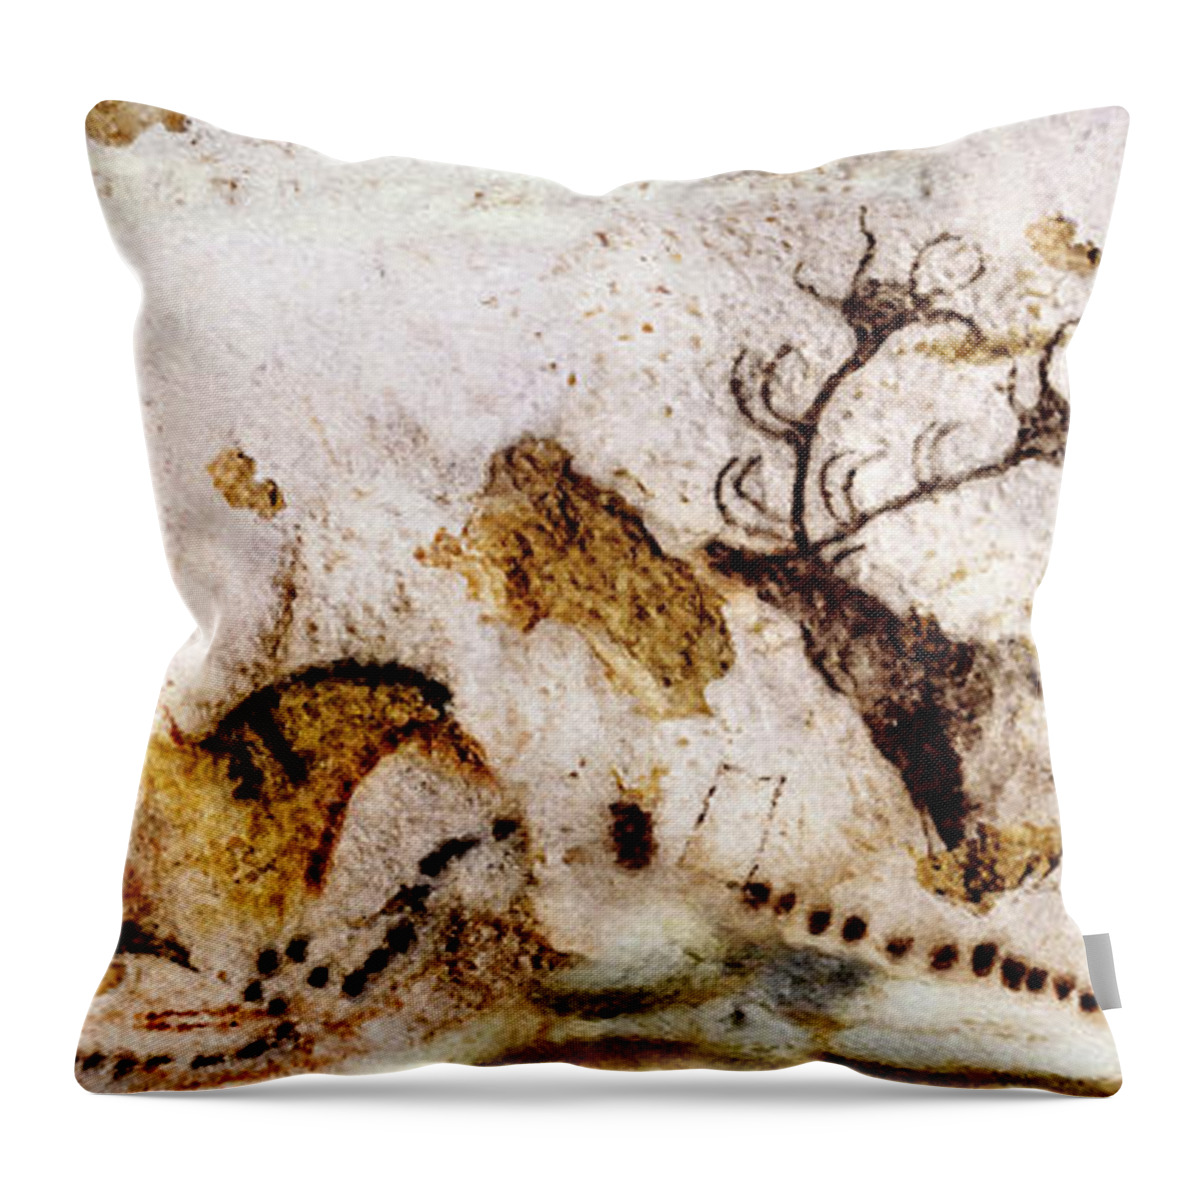 Lascaux Throw Pillow featuring the digital art Lascaux Cow Horse and Deer by Weston Westmoreland